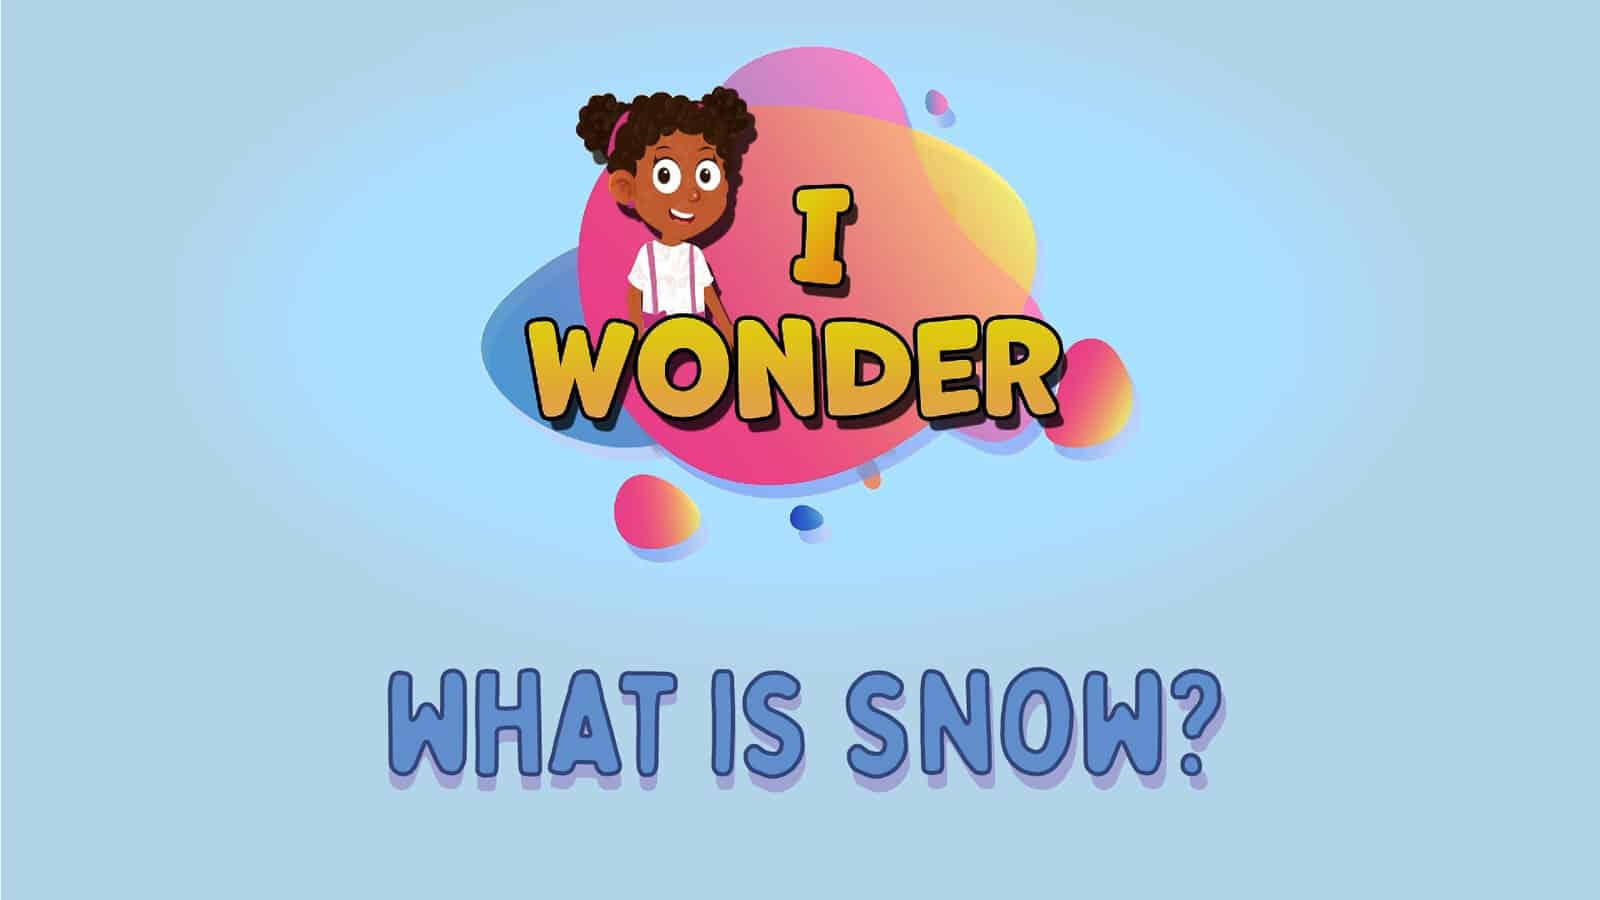 What Is Snow?